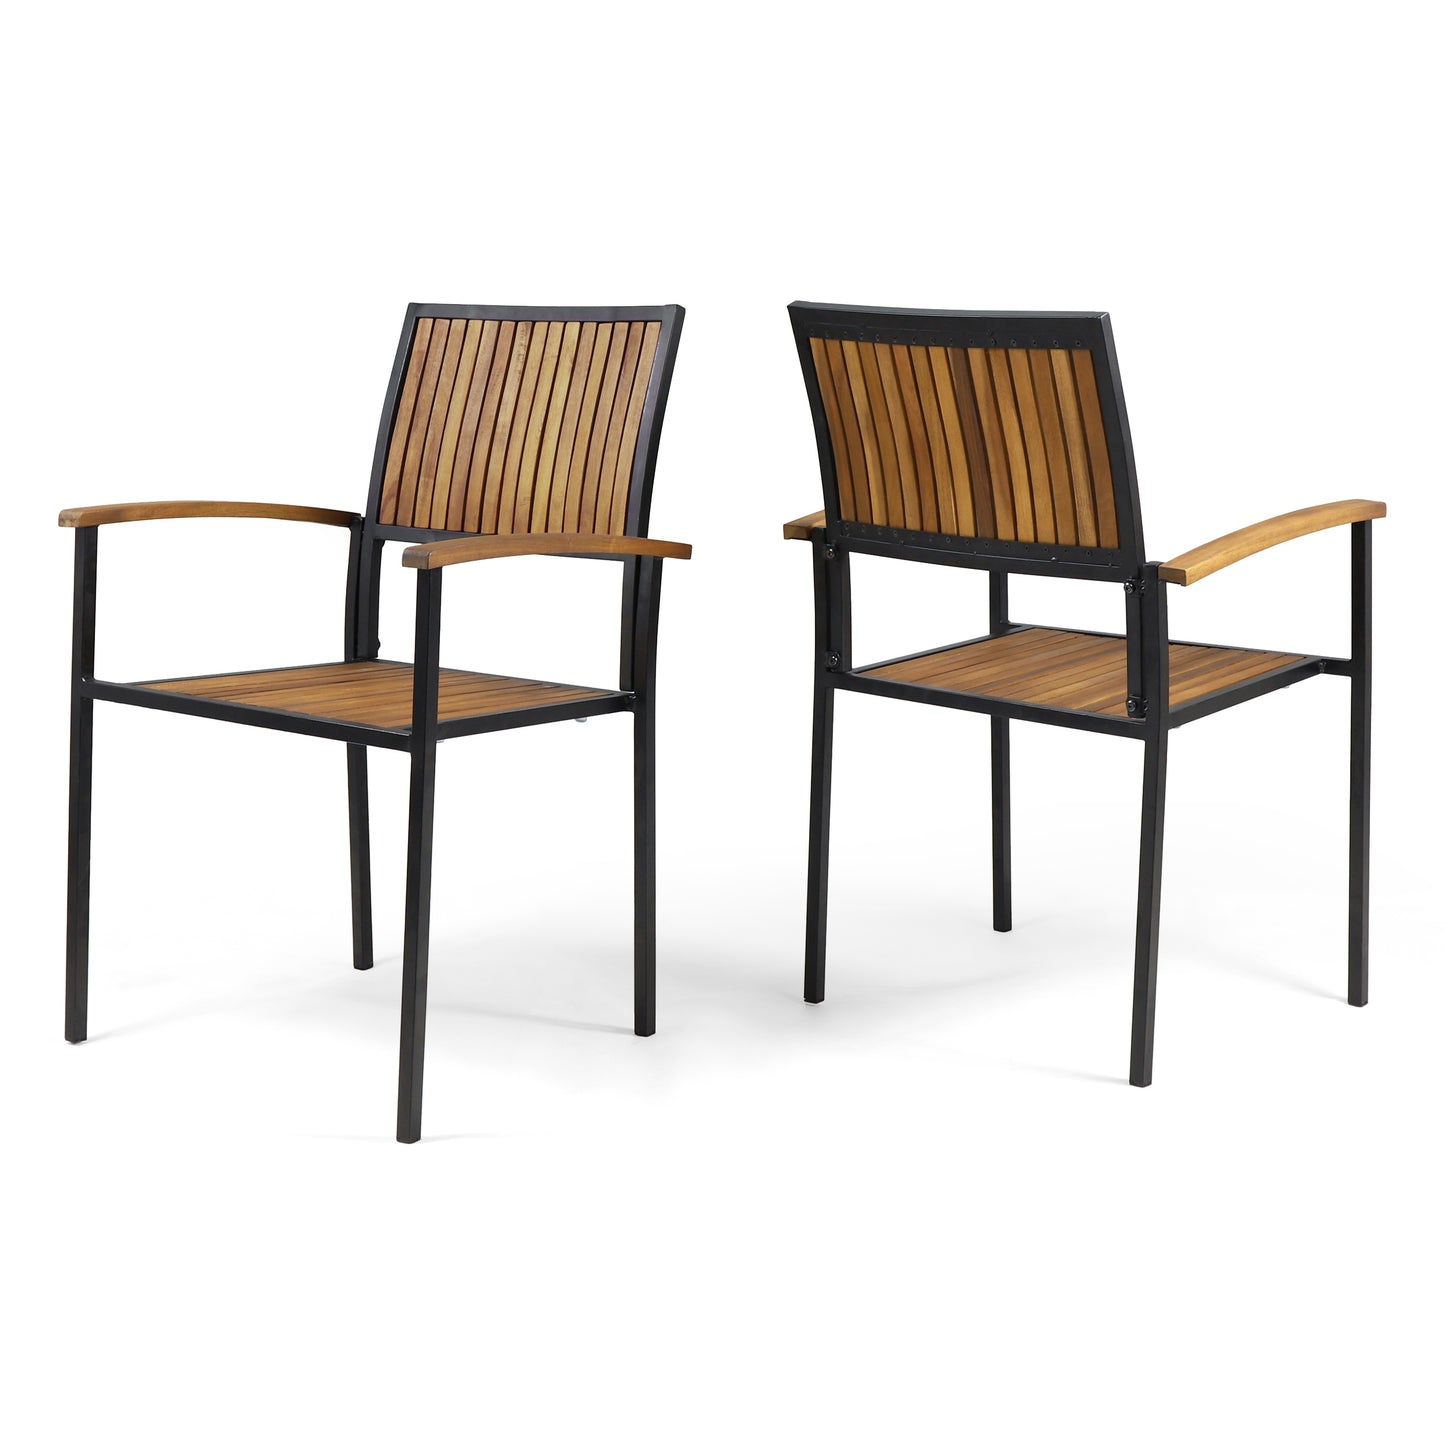 Owen Outdoor Wood and Iron Dining Chair (Set of 2)